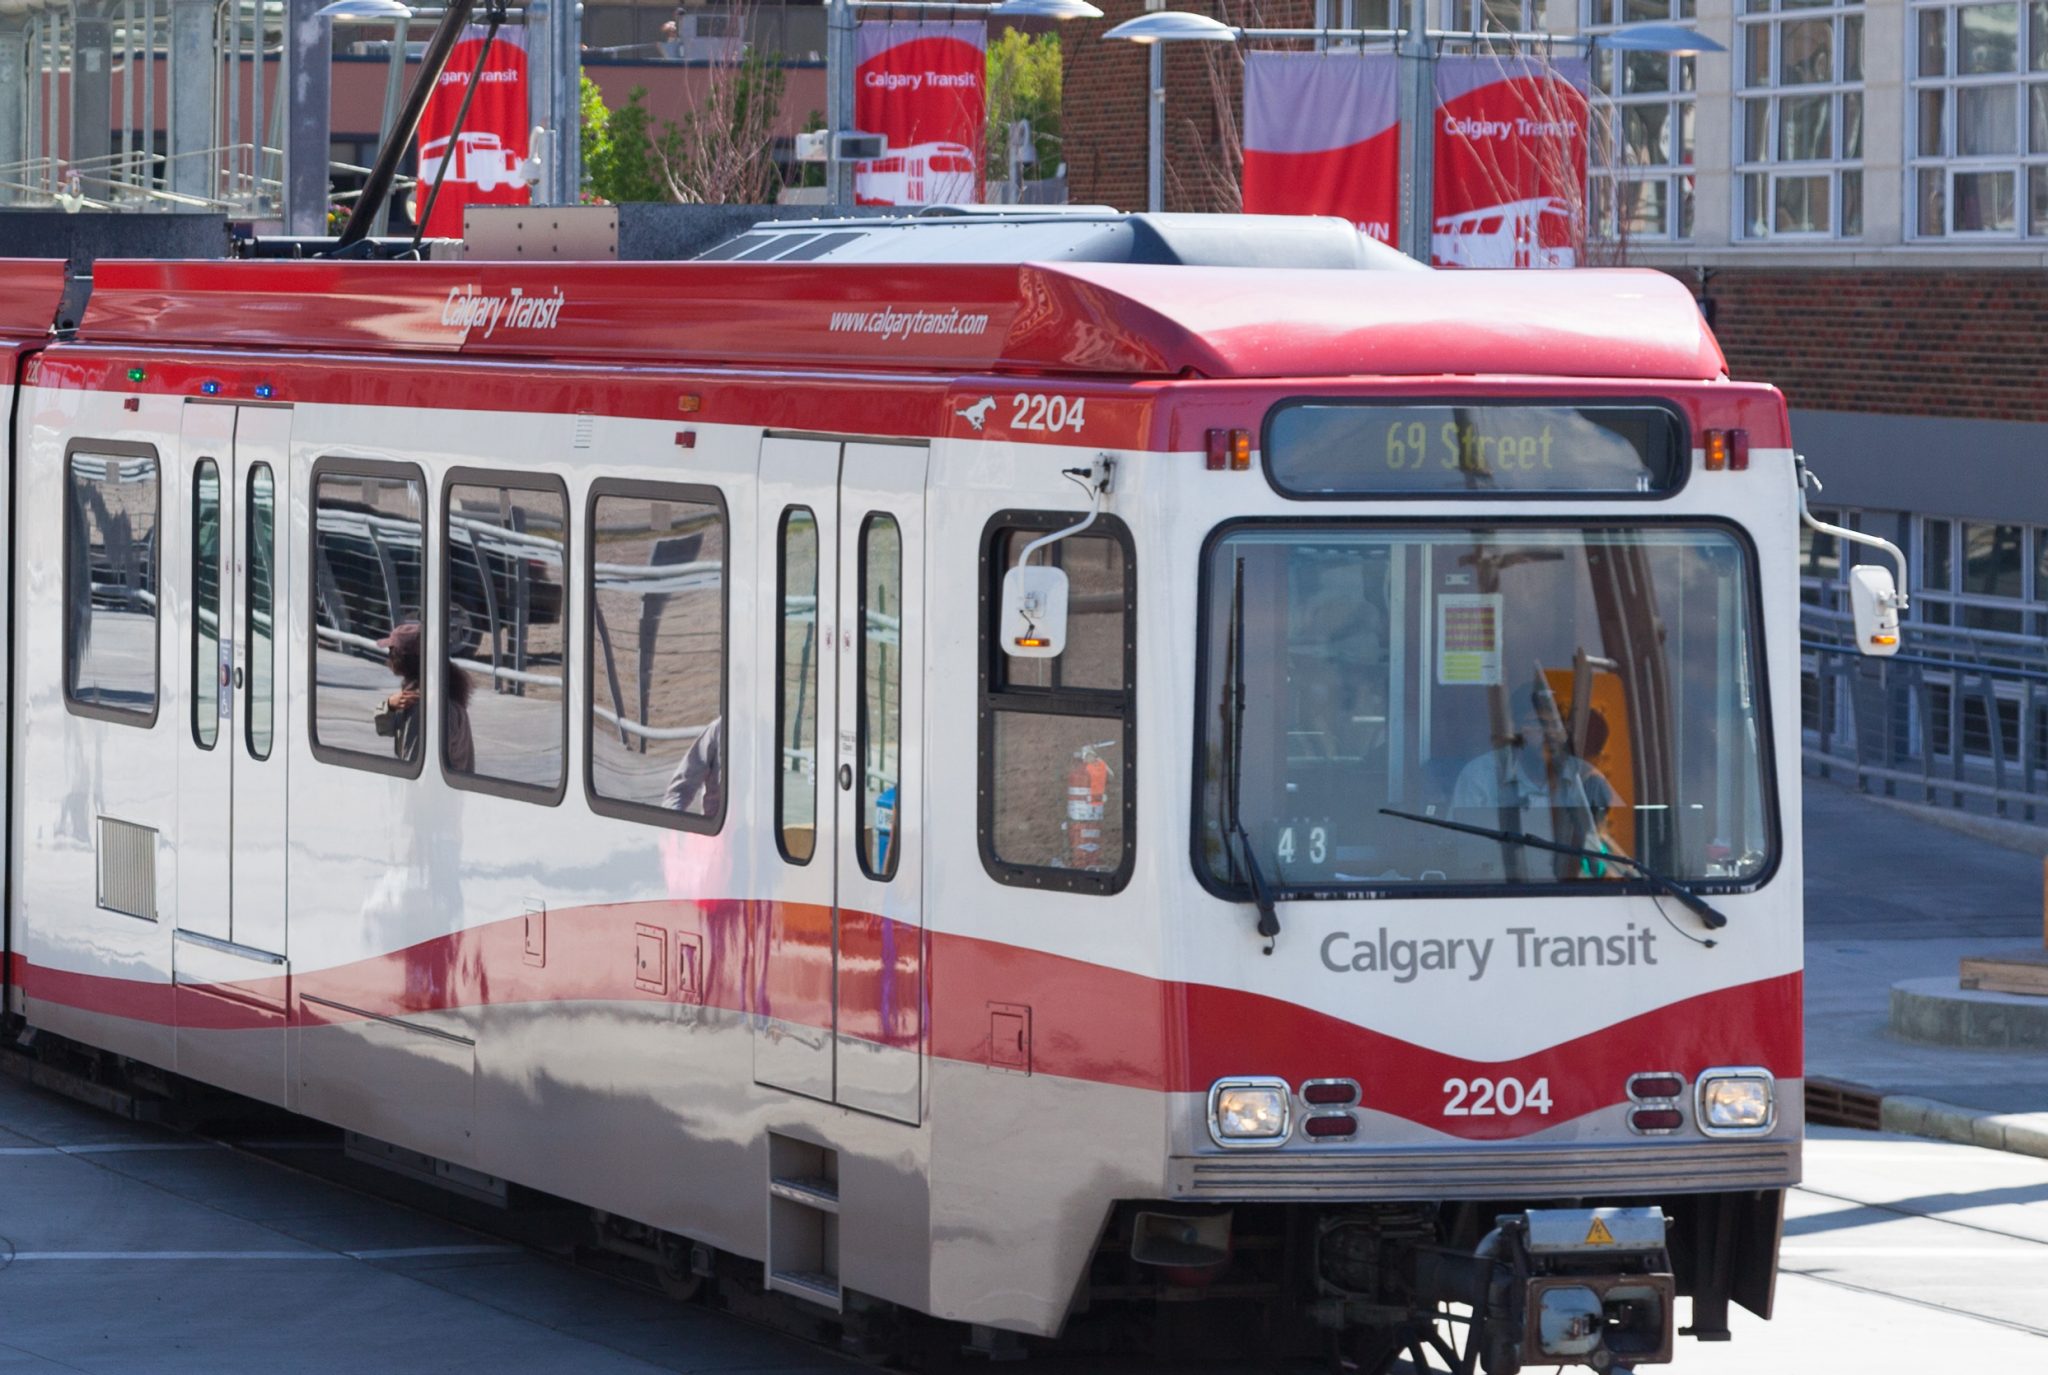 Siemens SD-160 – Car 2204, Series 5 with updated livery operating on 7 Avenue in downtown Calgary.